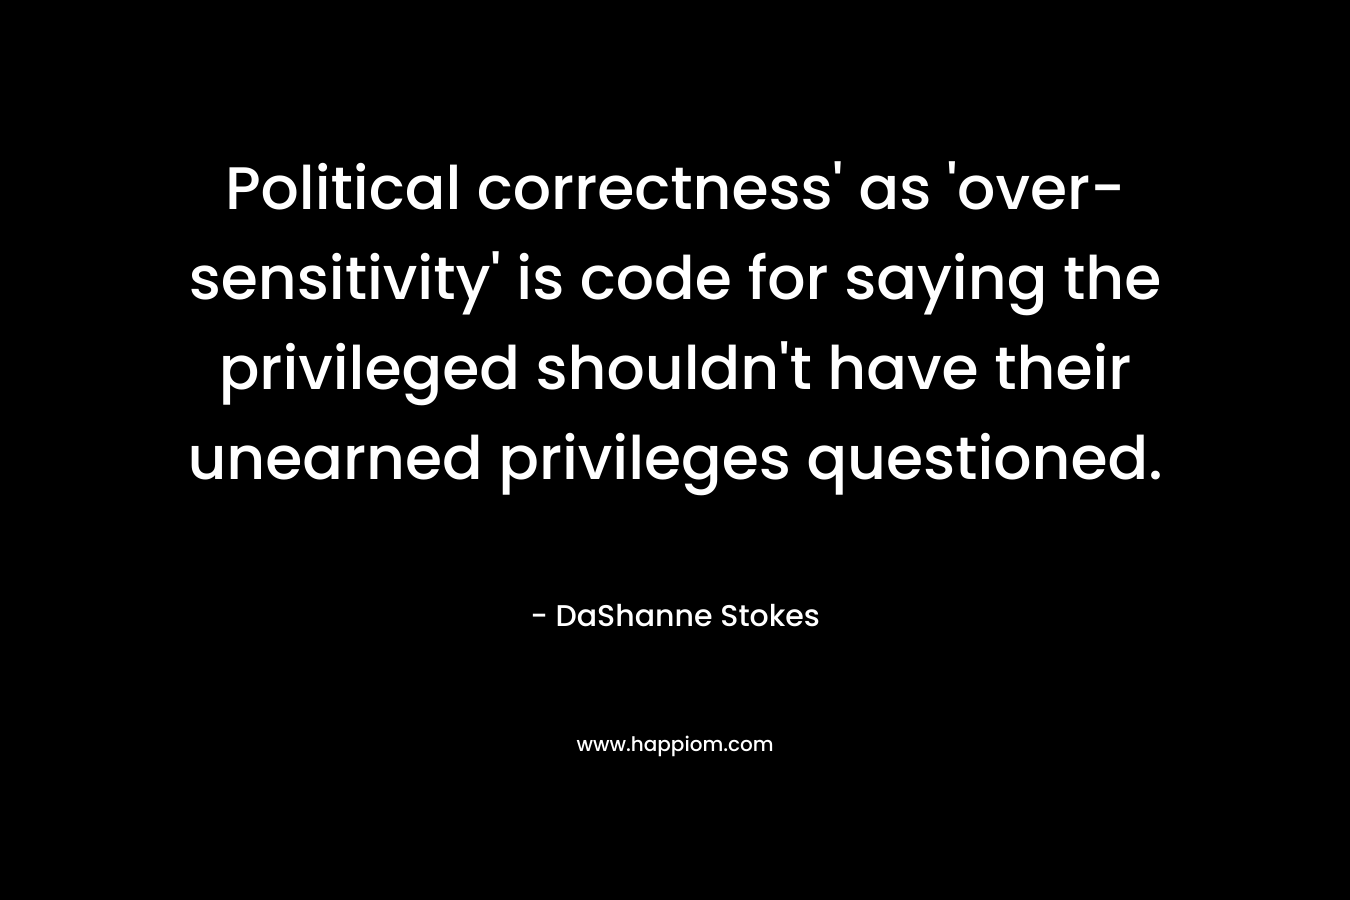 Political correctness’ as ‘over-sensitivity’ is code for saying the privileged shouldn’t have their unearned privileges questioned. – DaShanne Stokes